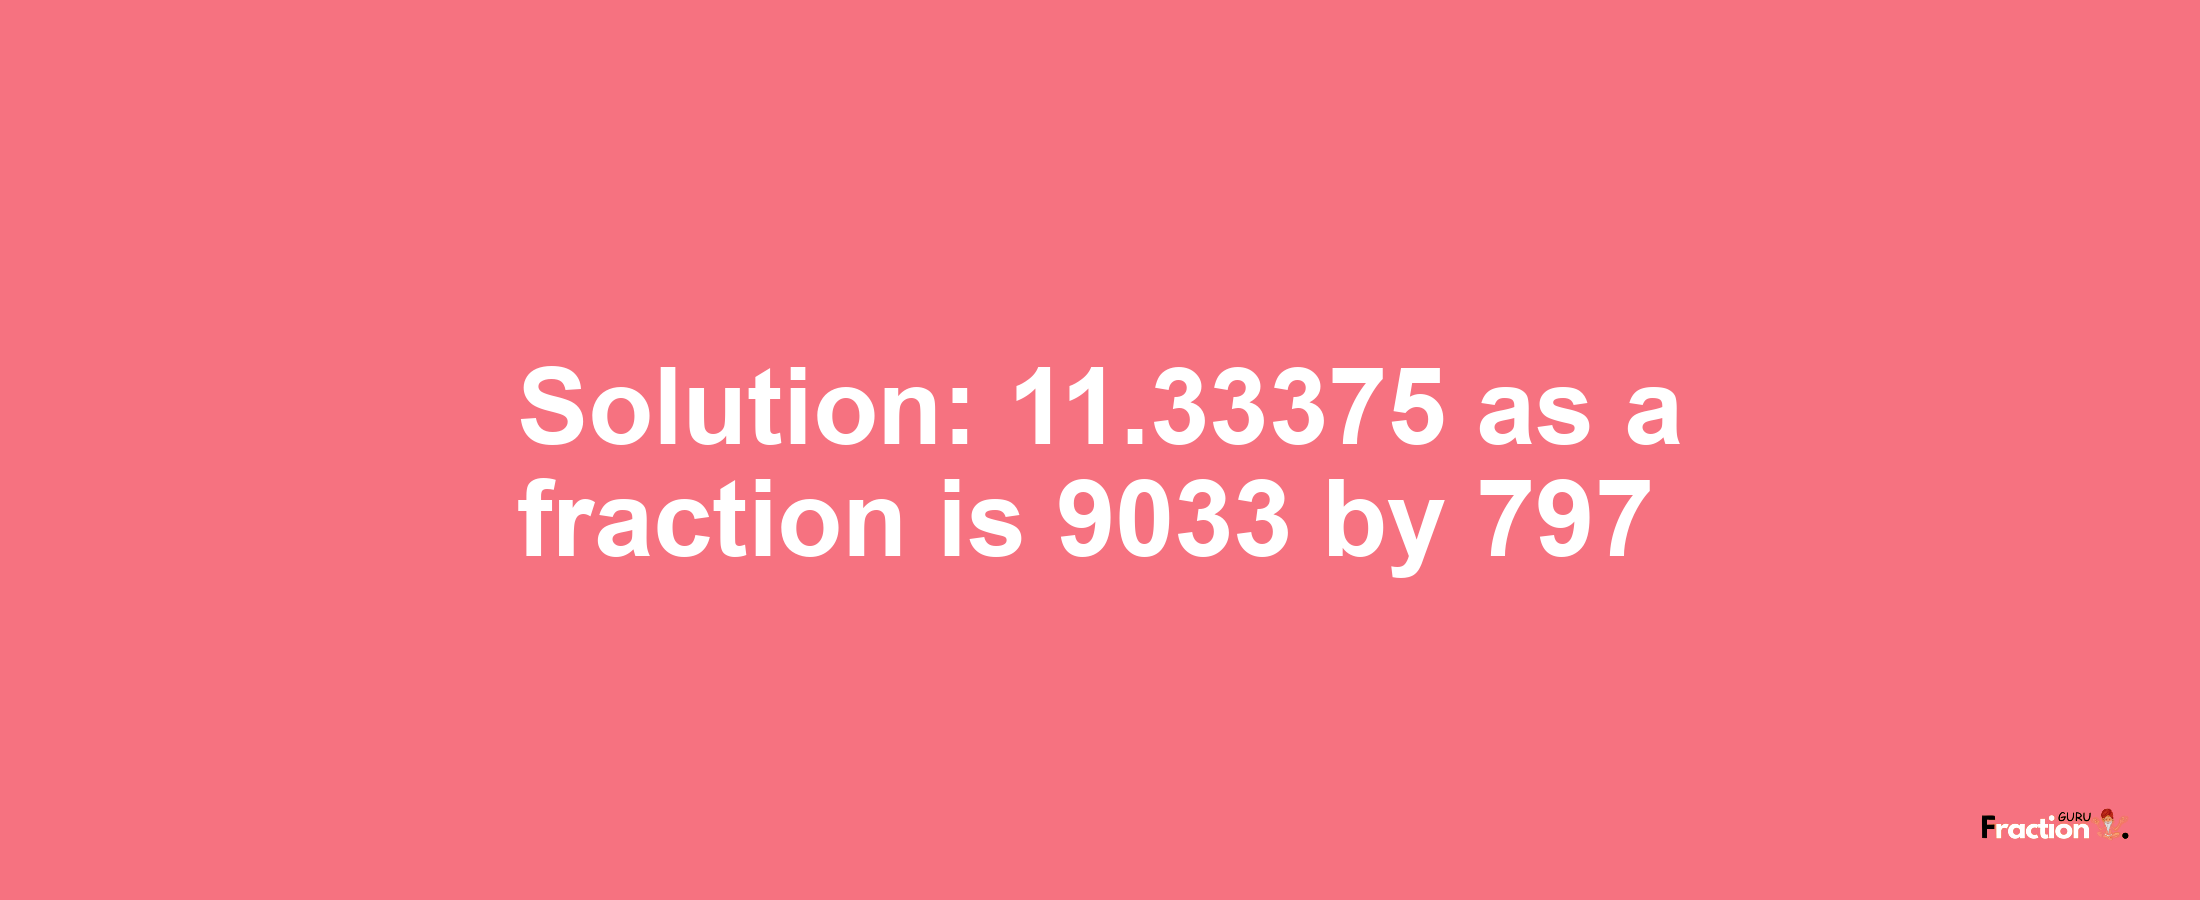 Solution:11.33375 as a fraction is 9033/797